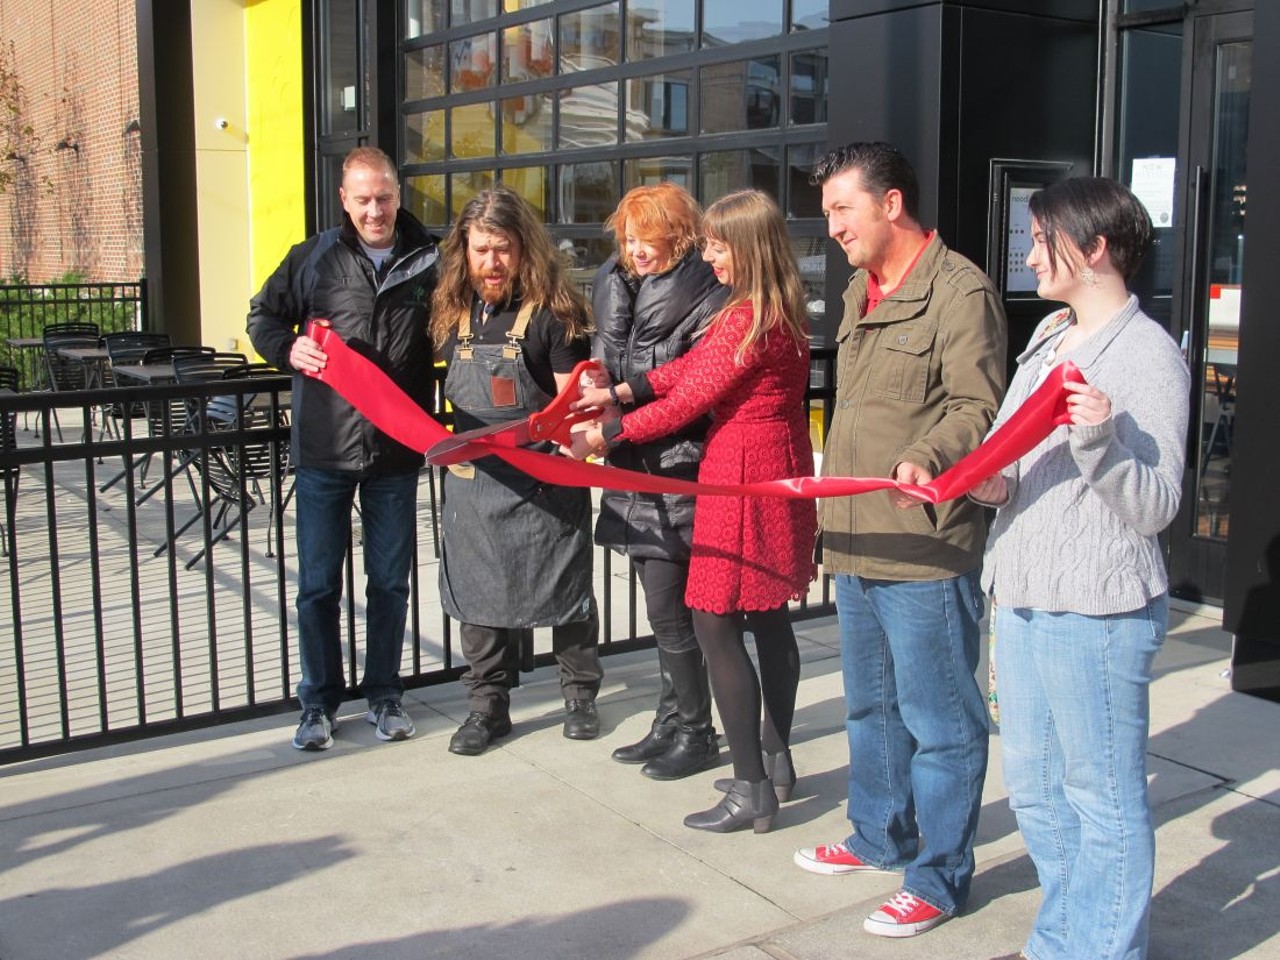 Photos from the Ribbon Cutting Ceremony at the New Noodlecat in Westlake